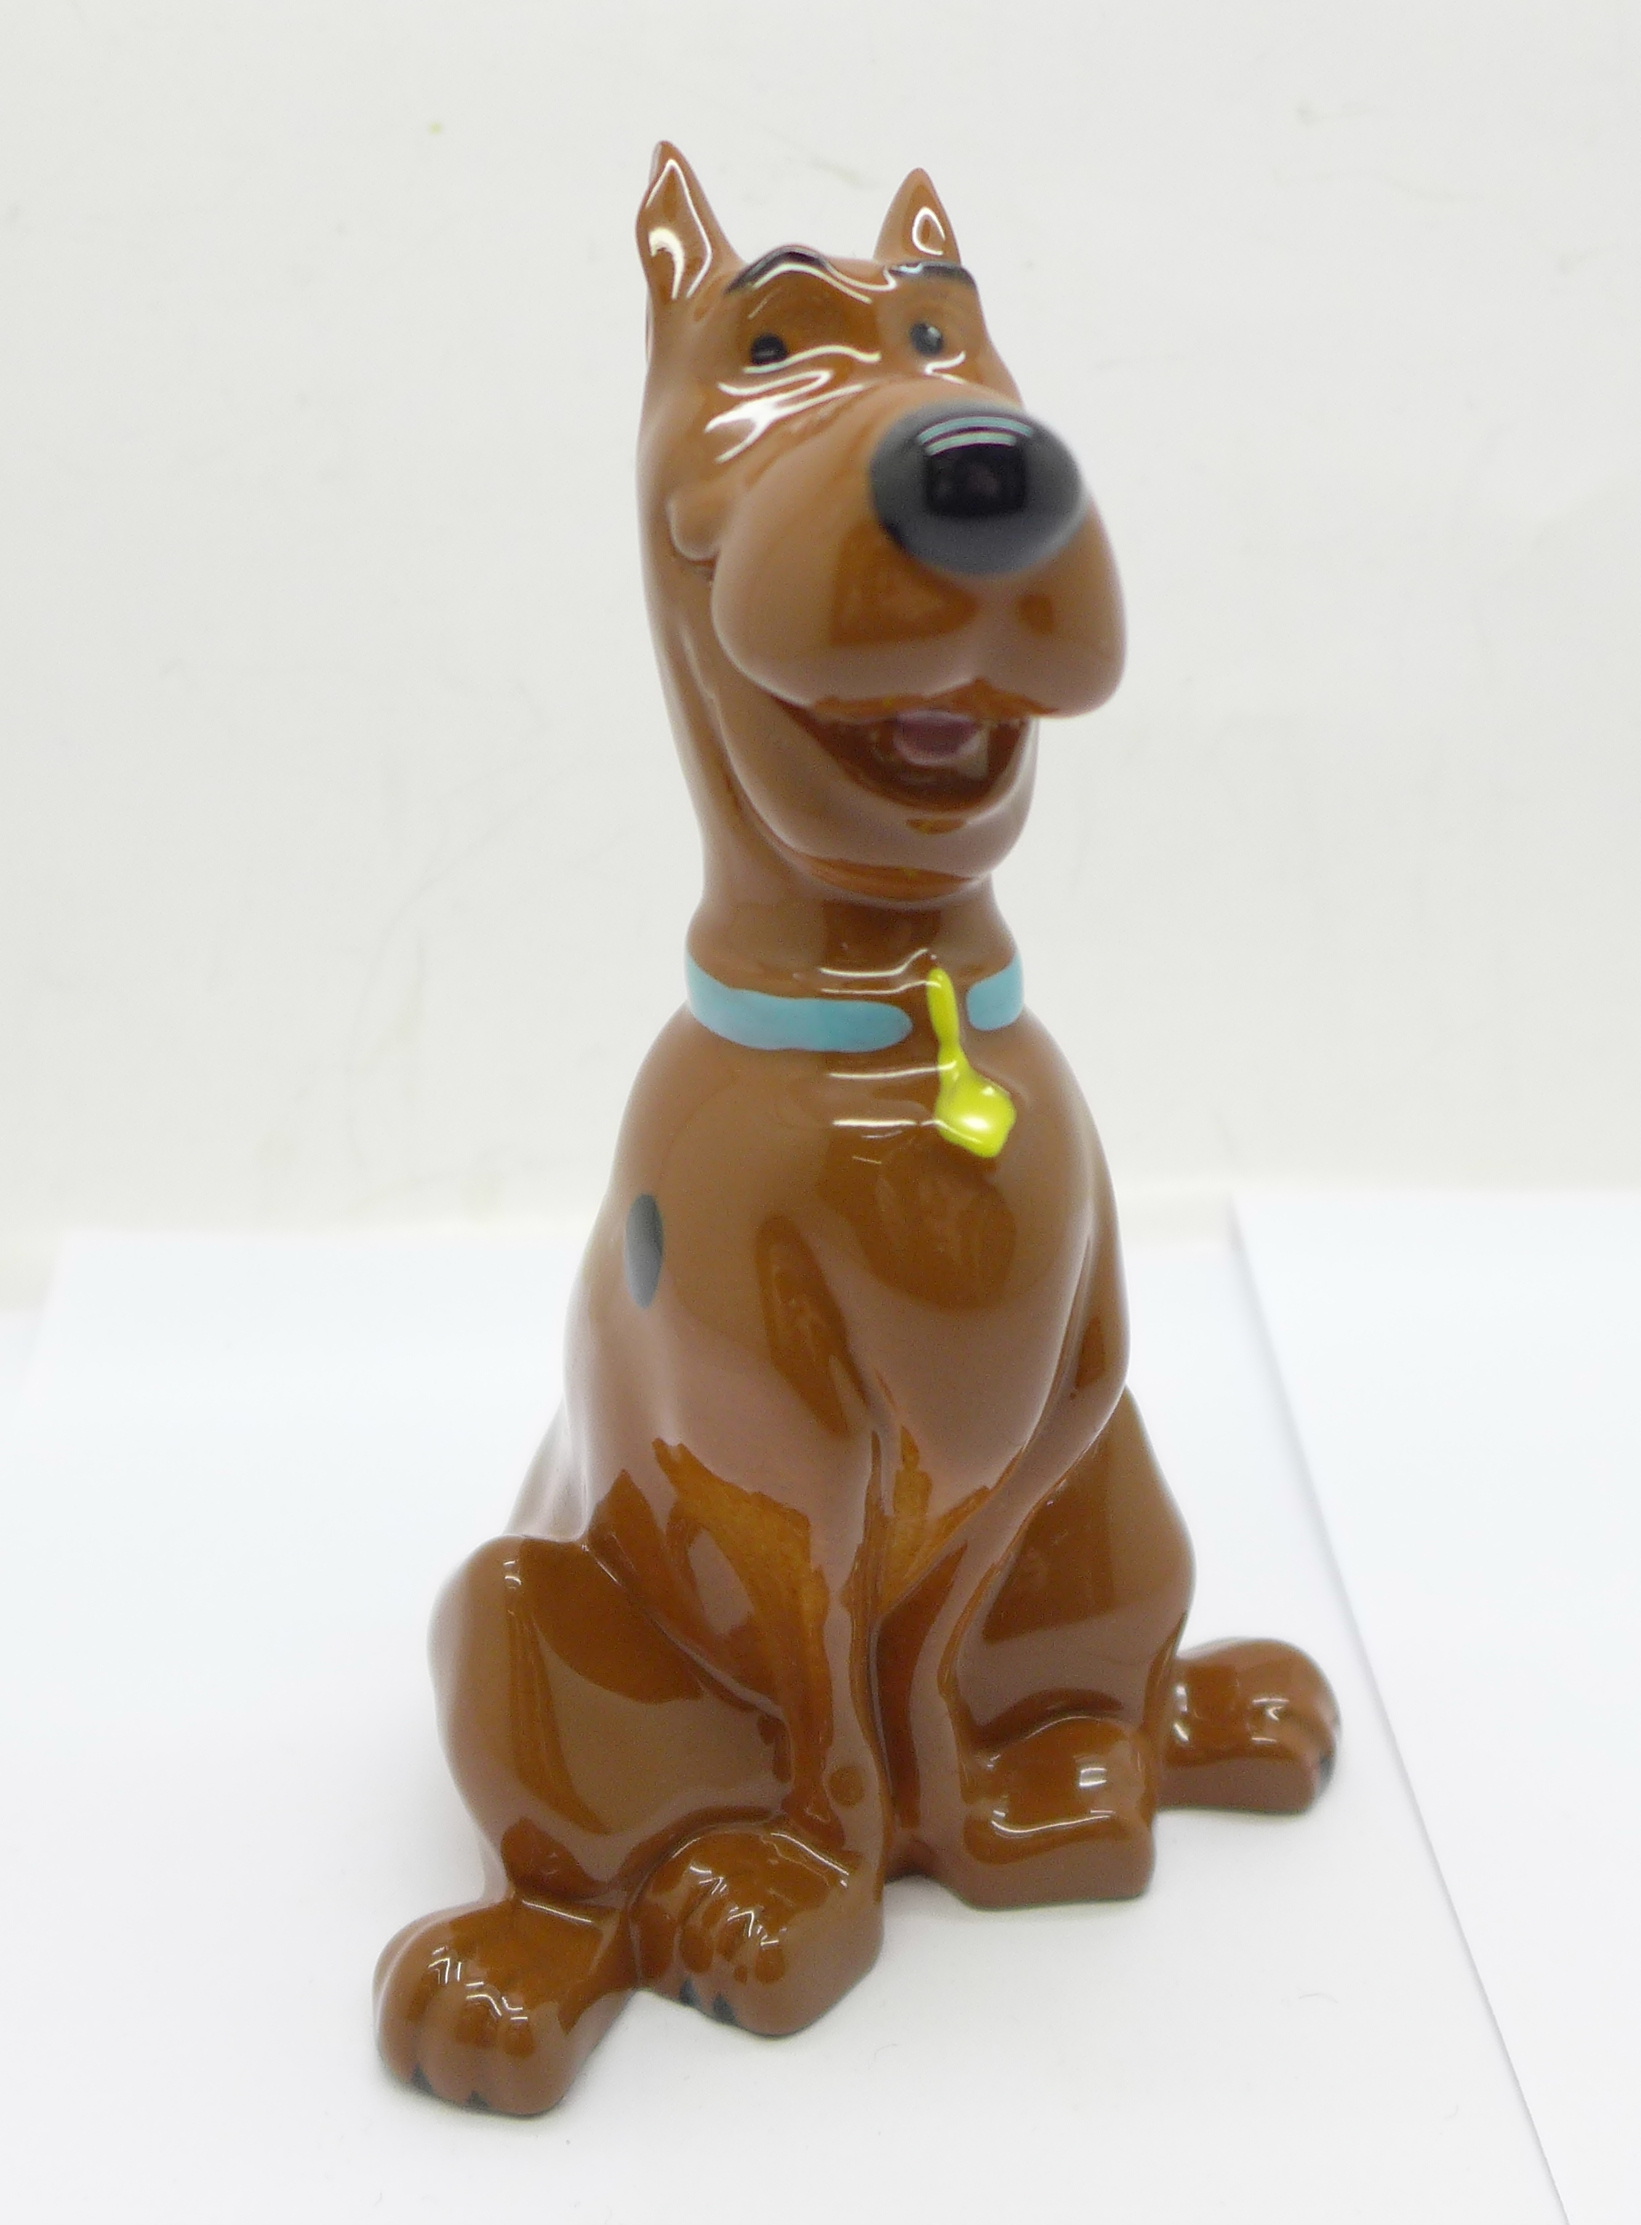 A Wade limited edition Scooby-Doo